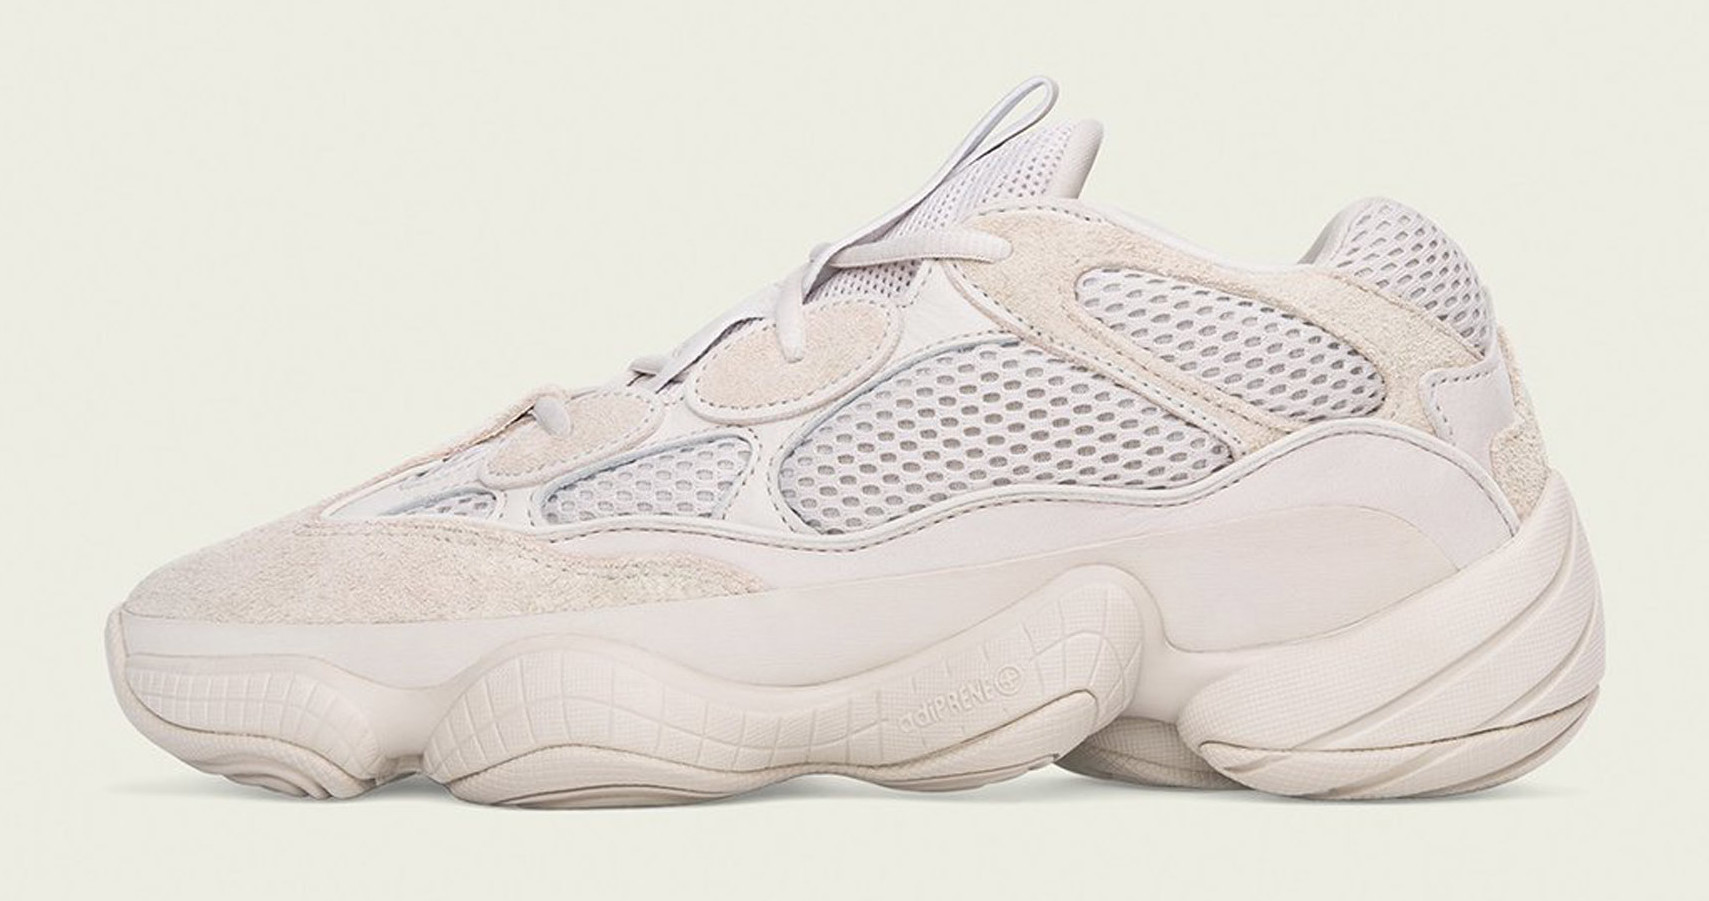 Blush' Yeezy 500s Confirmed for This Weekend | Complex